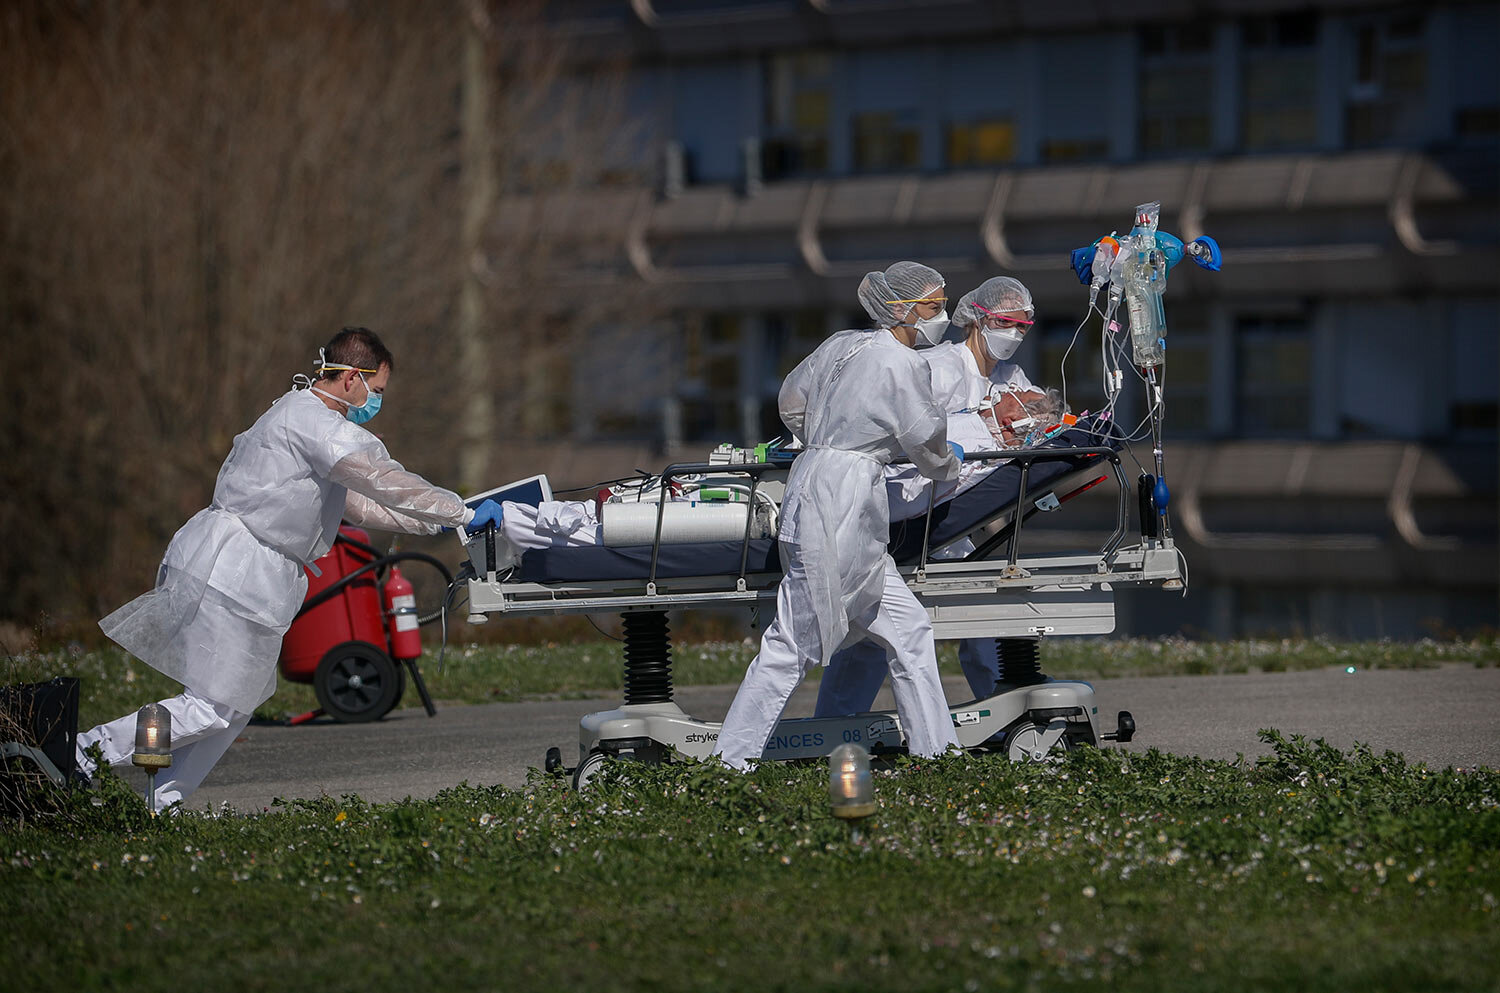  A victim of the Covid-19 virus is evacuated from the Mulhouse civil hospital, eastern France, March 23, 2020. (AP Photo/Jean-Francois Badias) 